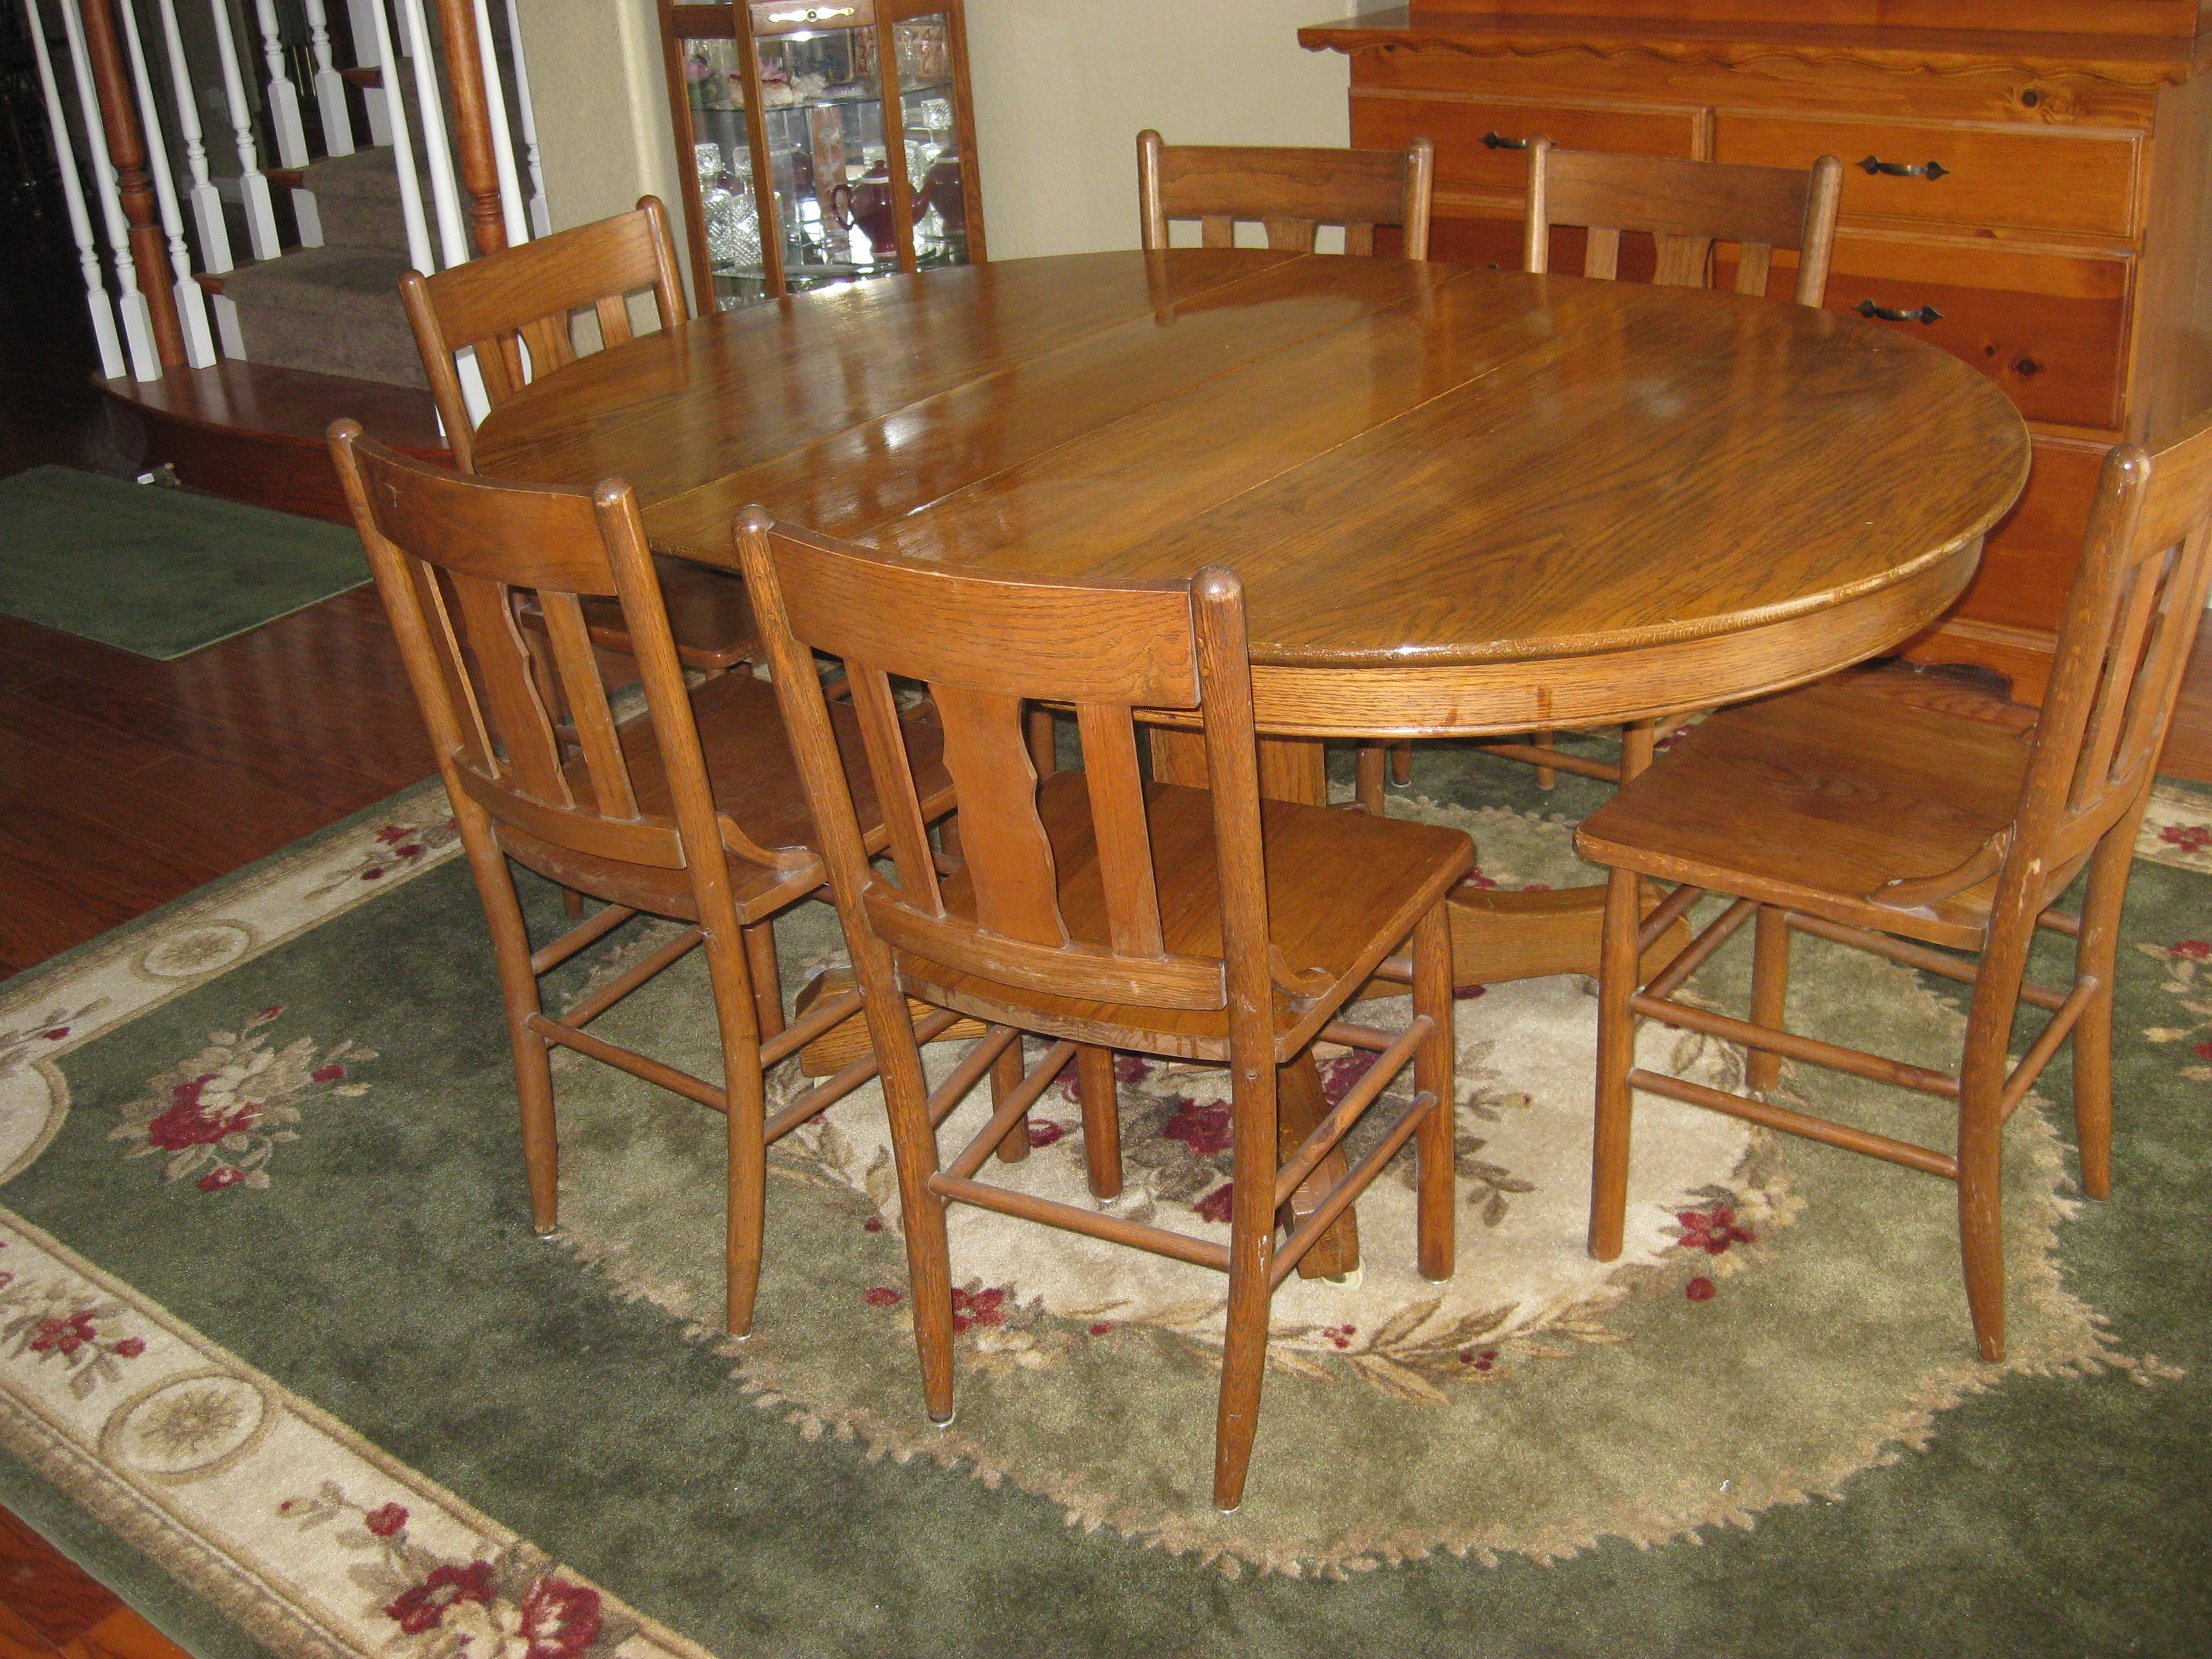 Oak Table Chairs And Hutch For Sale Antiques Com Classifieds